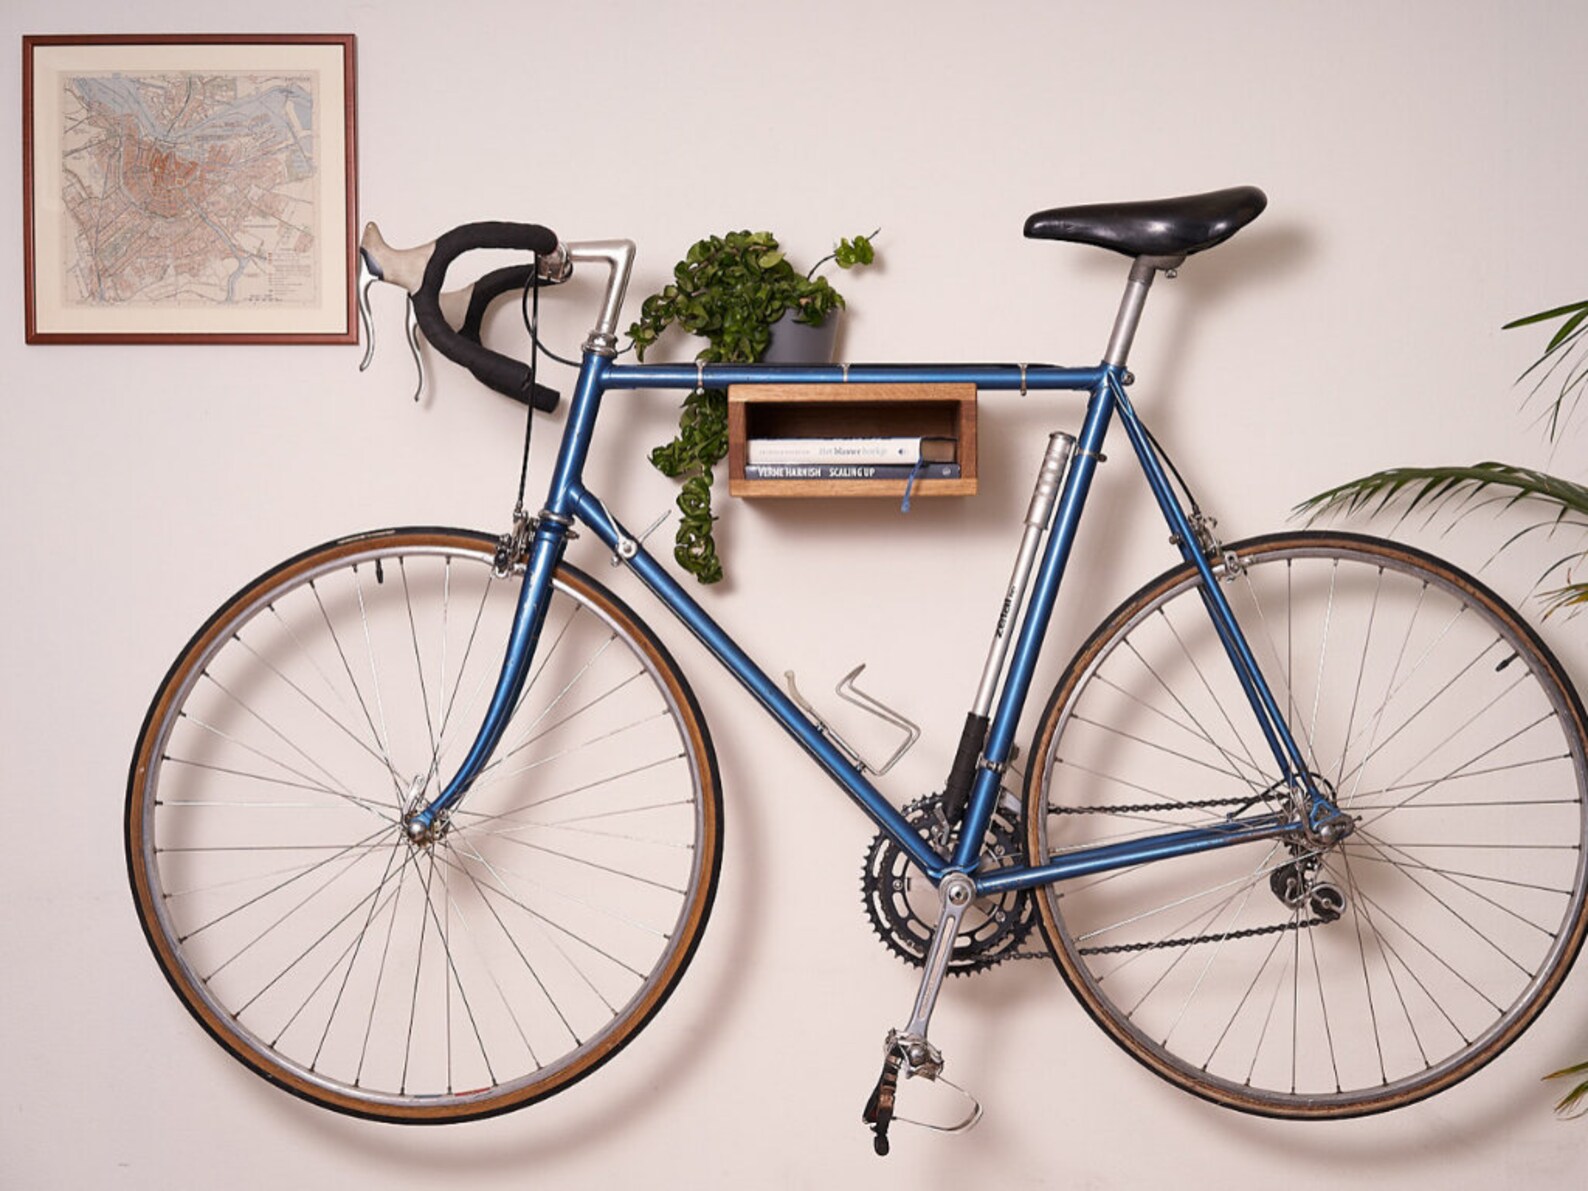 Etsy Wall Decor Ideas Wooden Bike Rack with Flowers on Top doubling as bookshelf